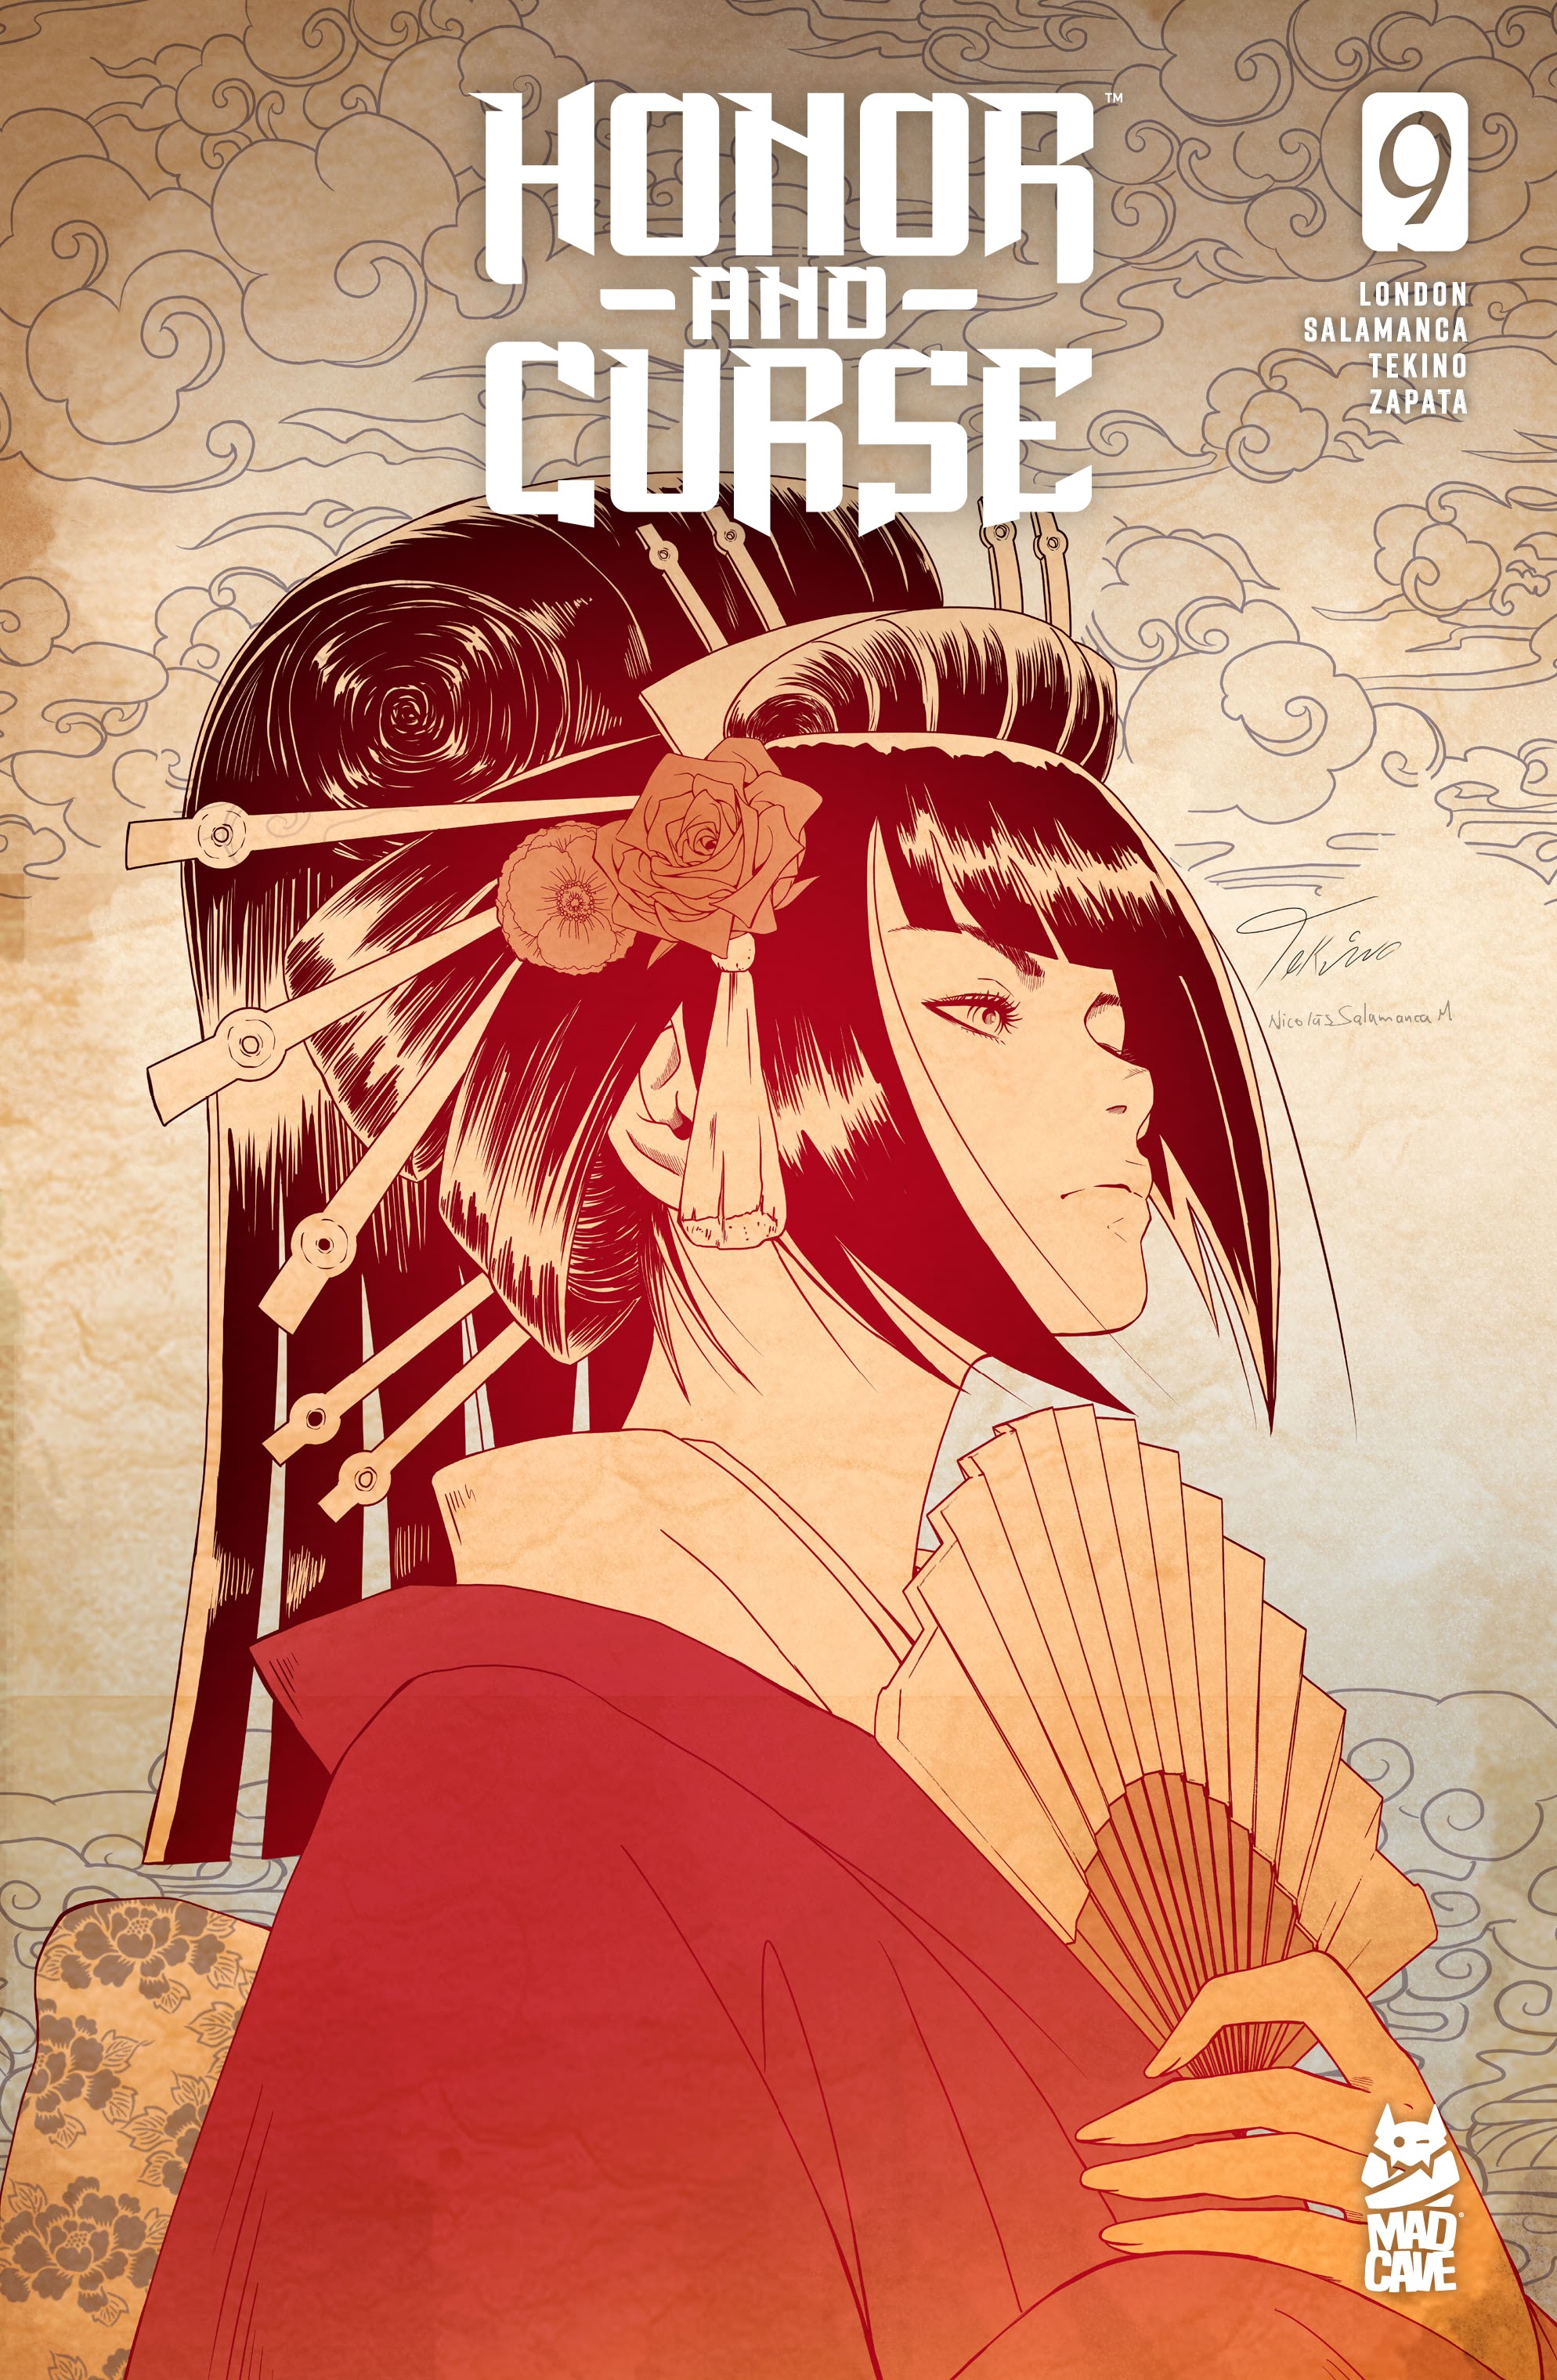 Read online Honor and Curse comic -  Issue #9 - 1